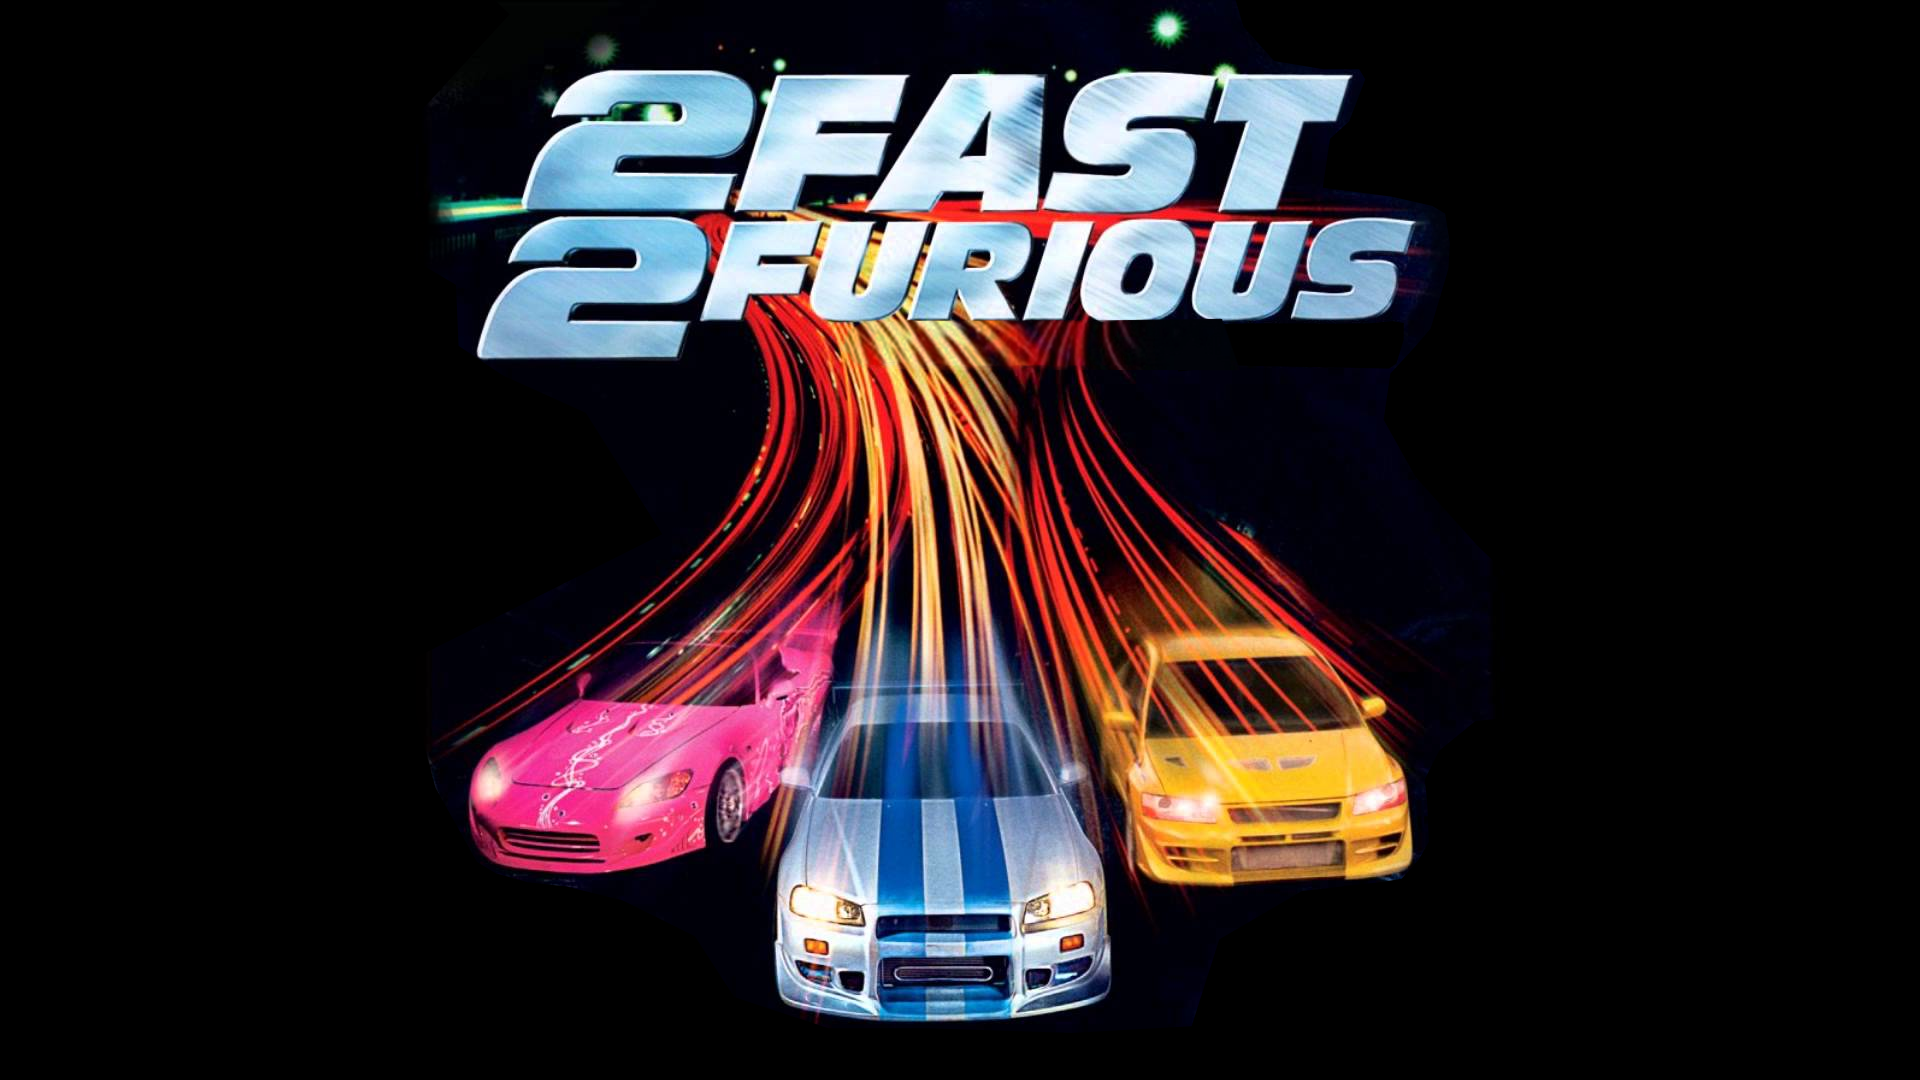 2 fast 2 furious soundtrack download